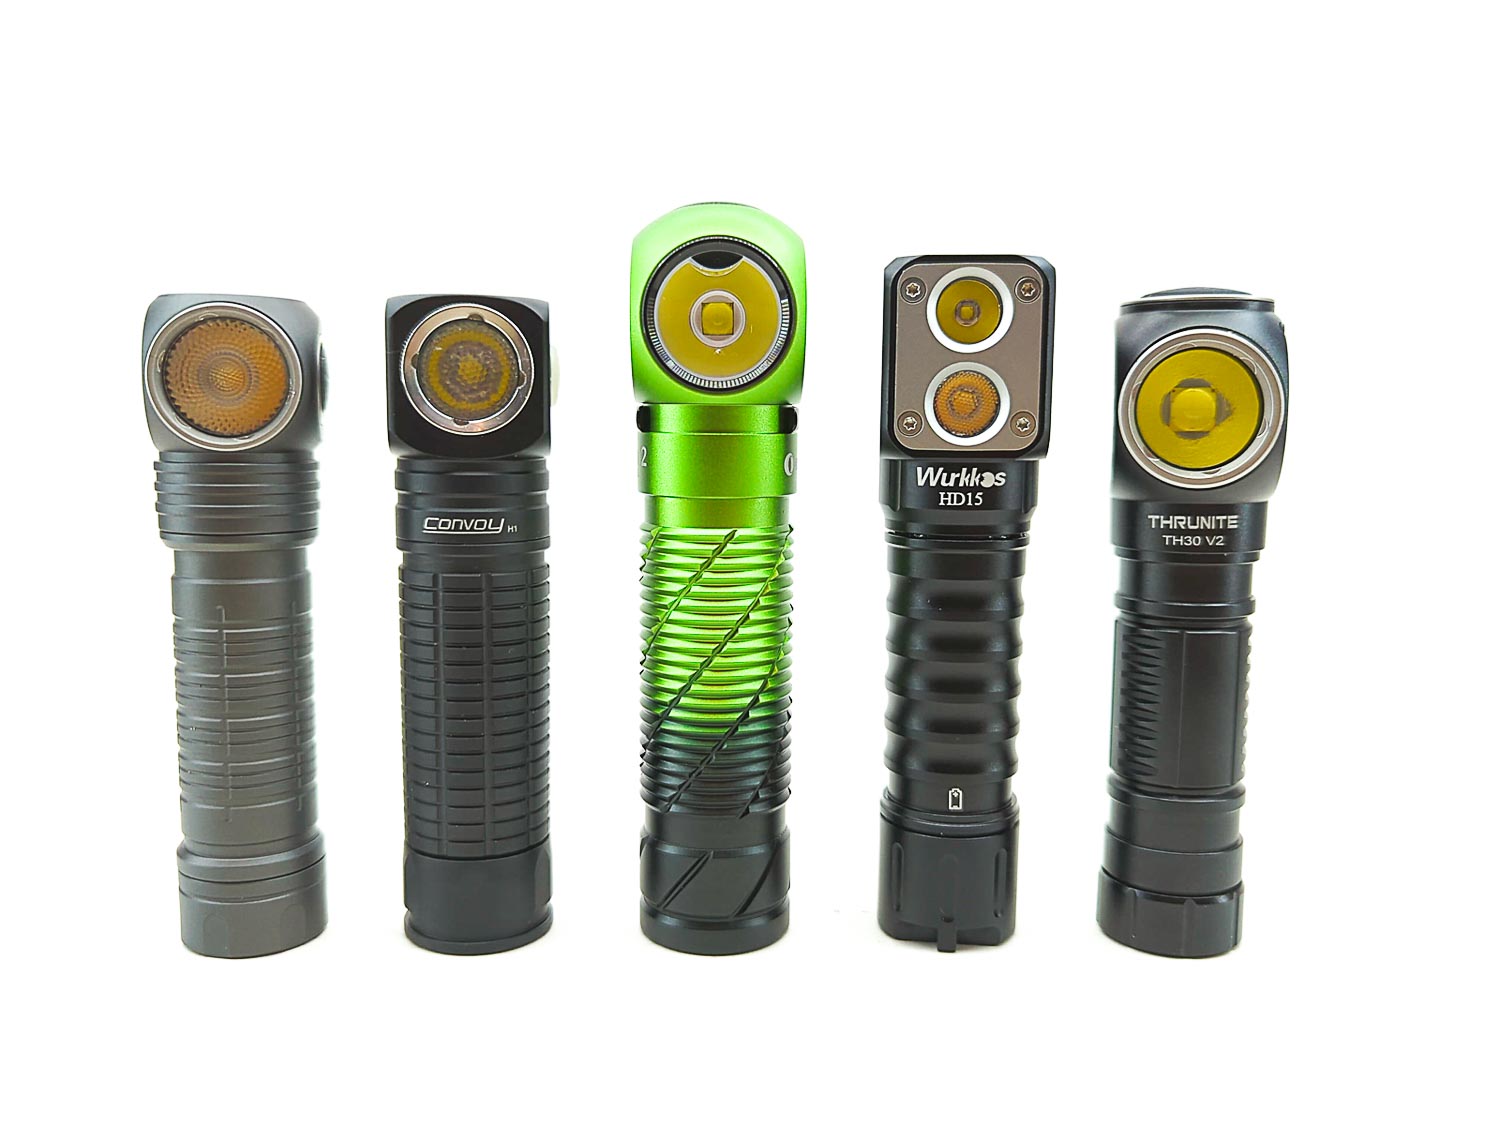 Olight Perun v2 comparison with other headlamps